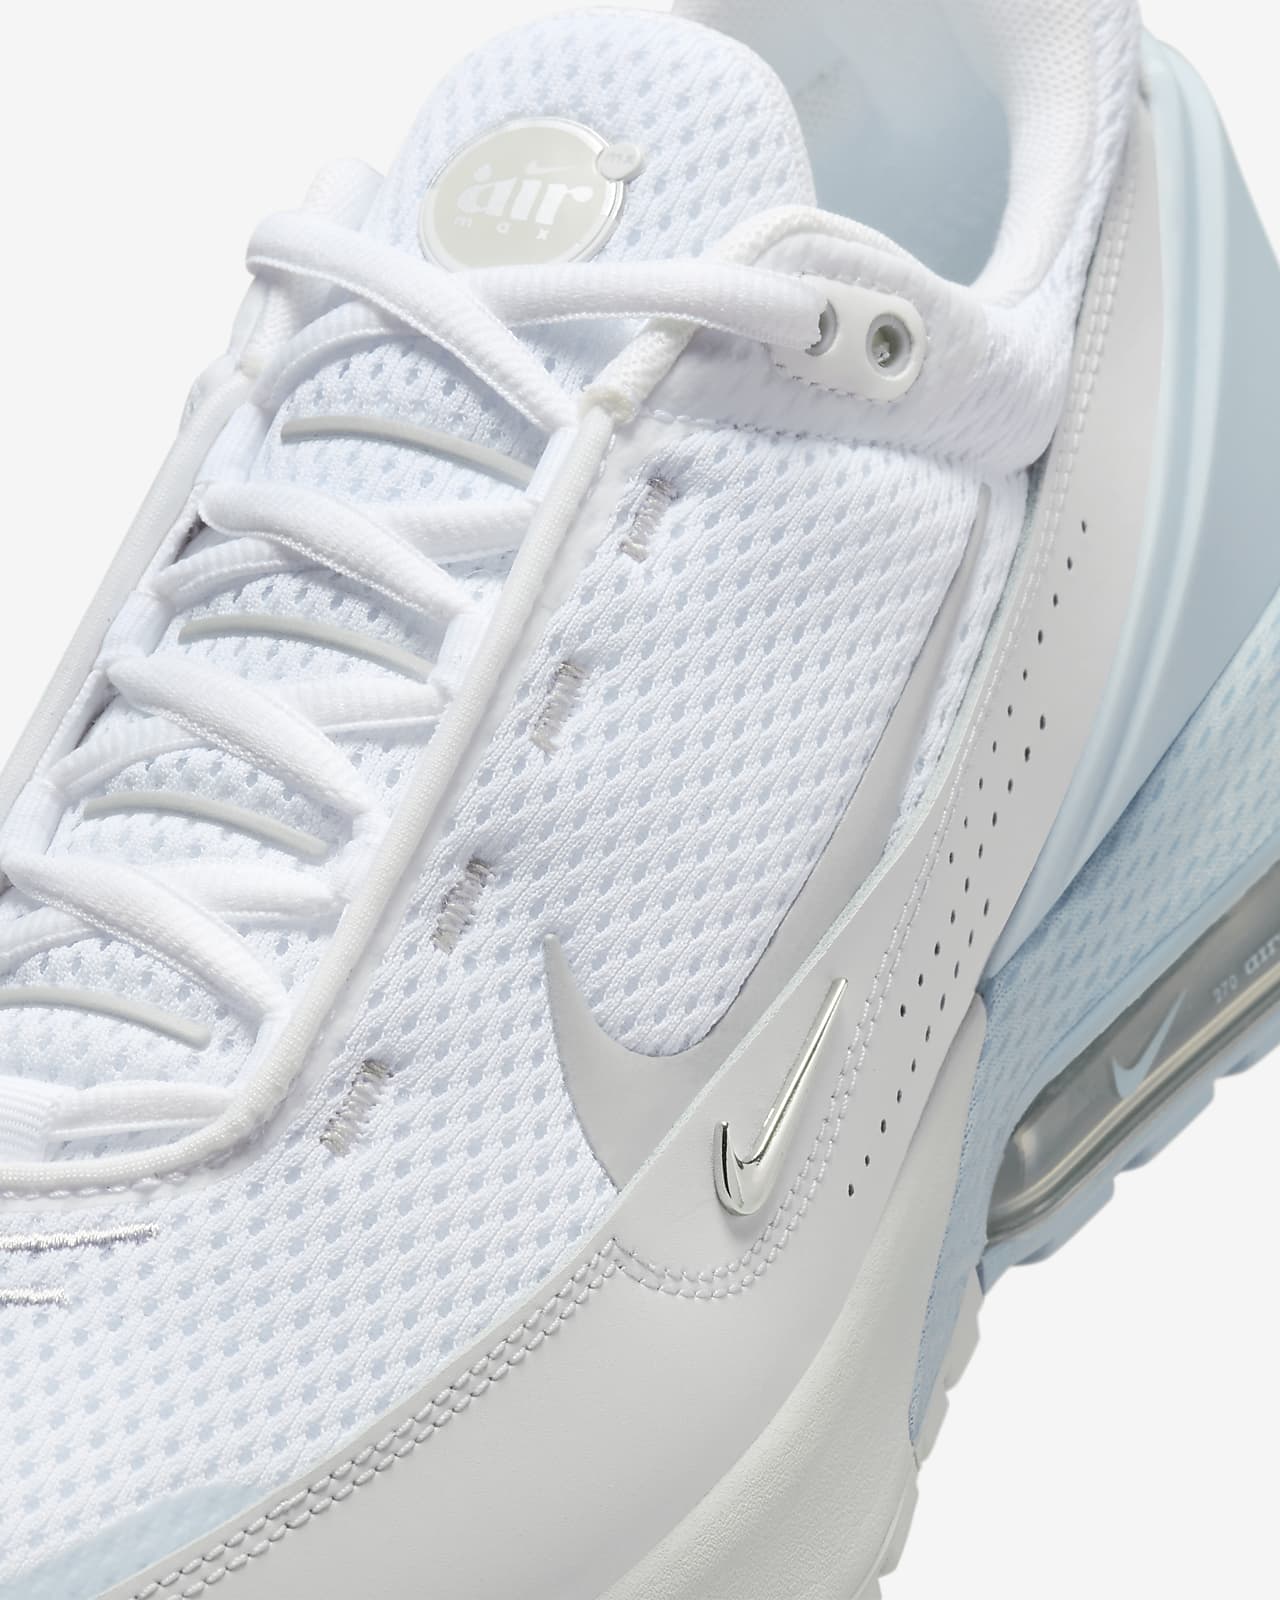 The Best White Sneakers by Nike. Nike.com